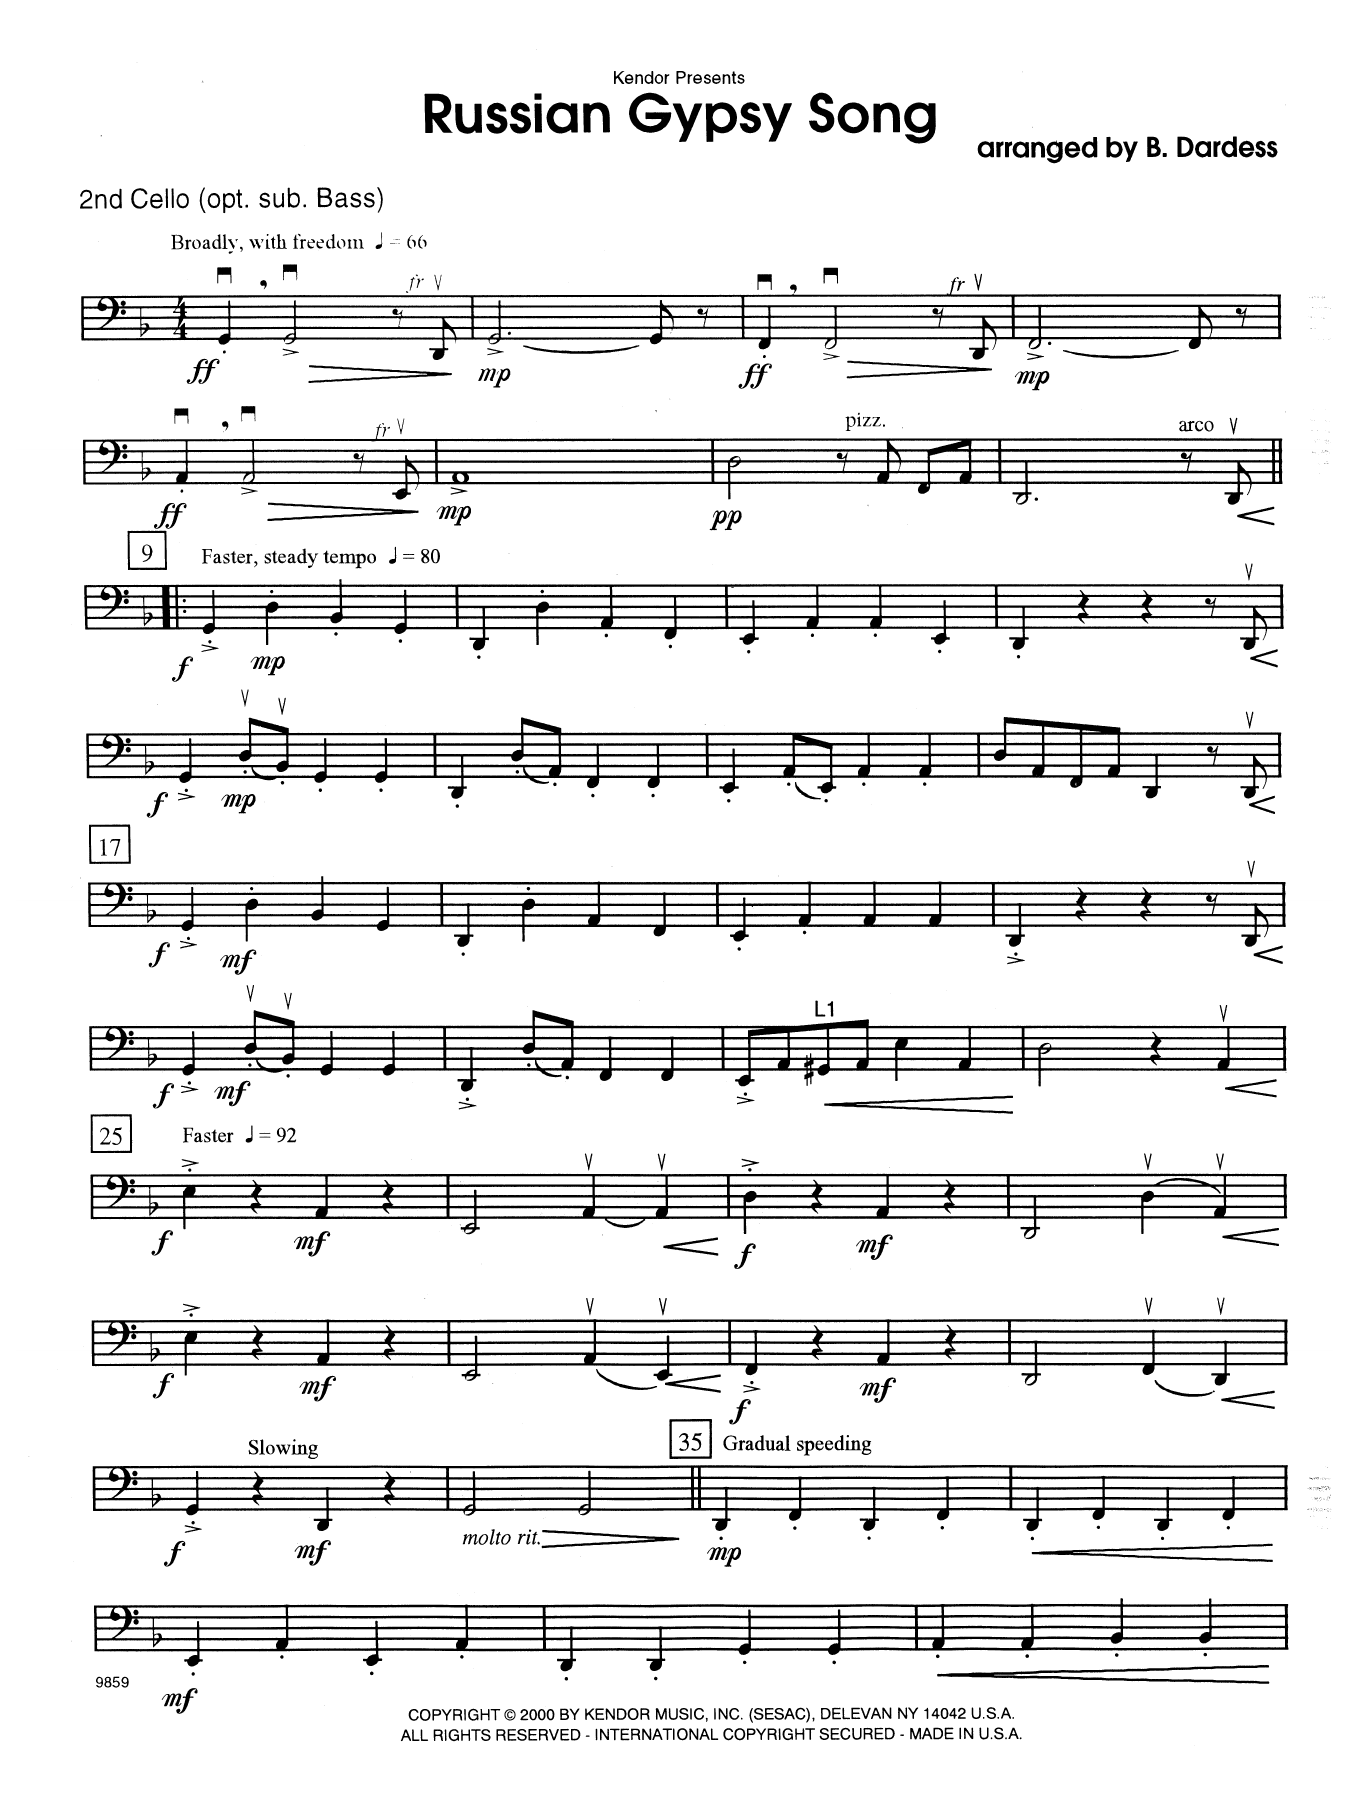 Download Betty Dardess Russian Gypsy Song - 2nd Cello Sheet Music